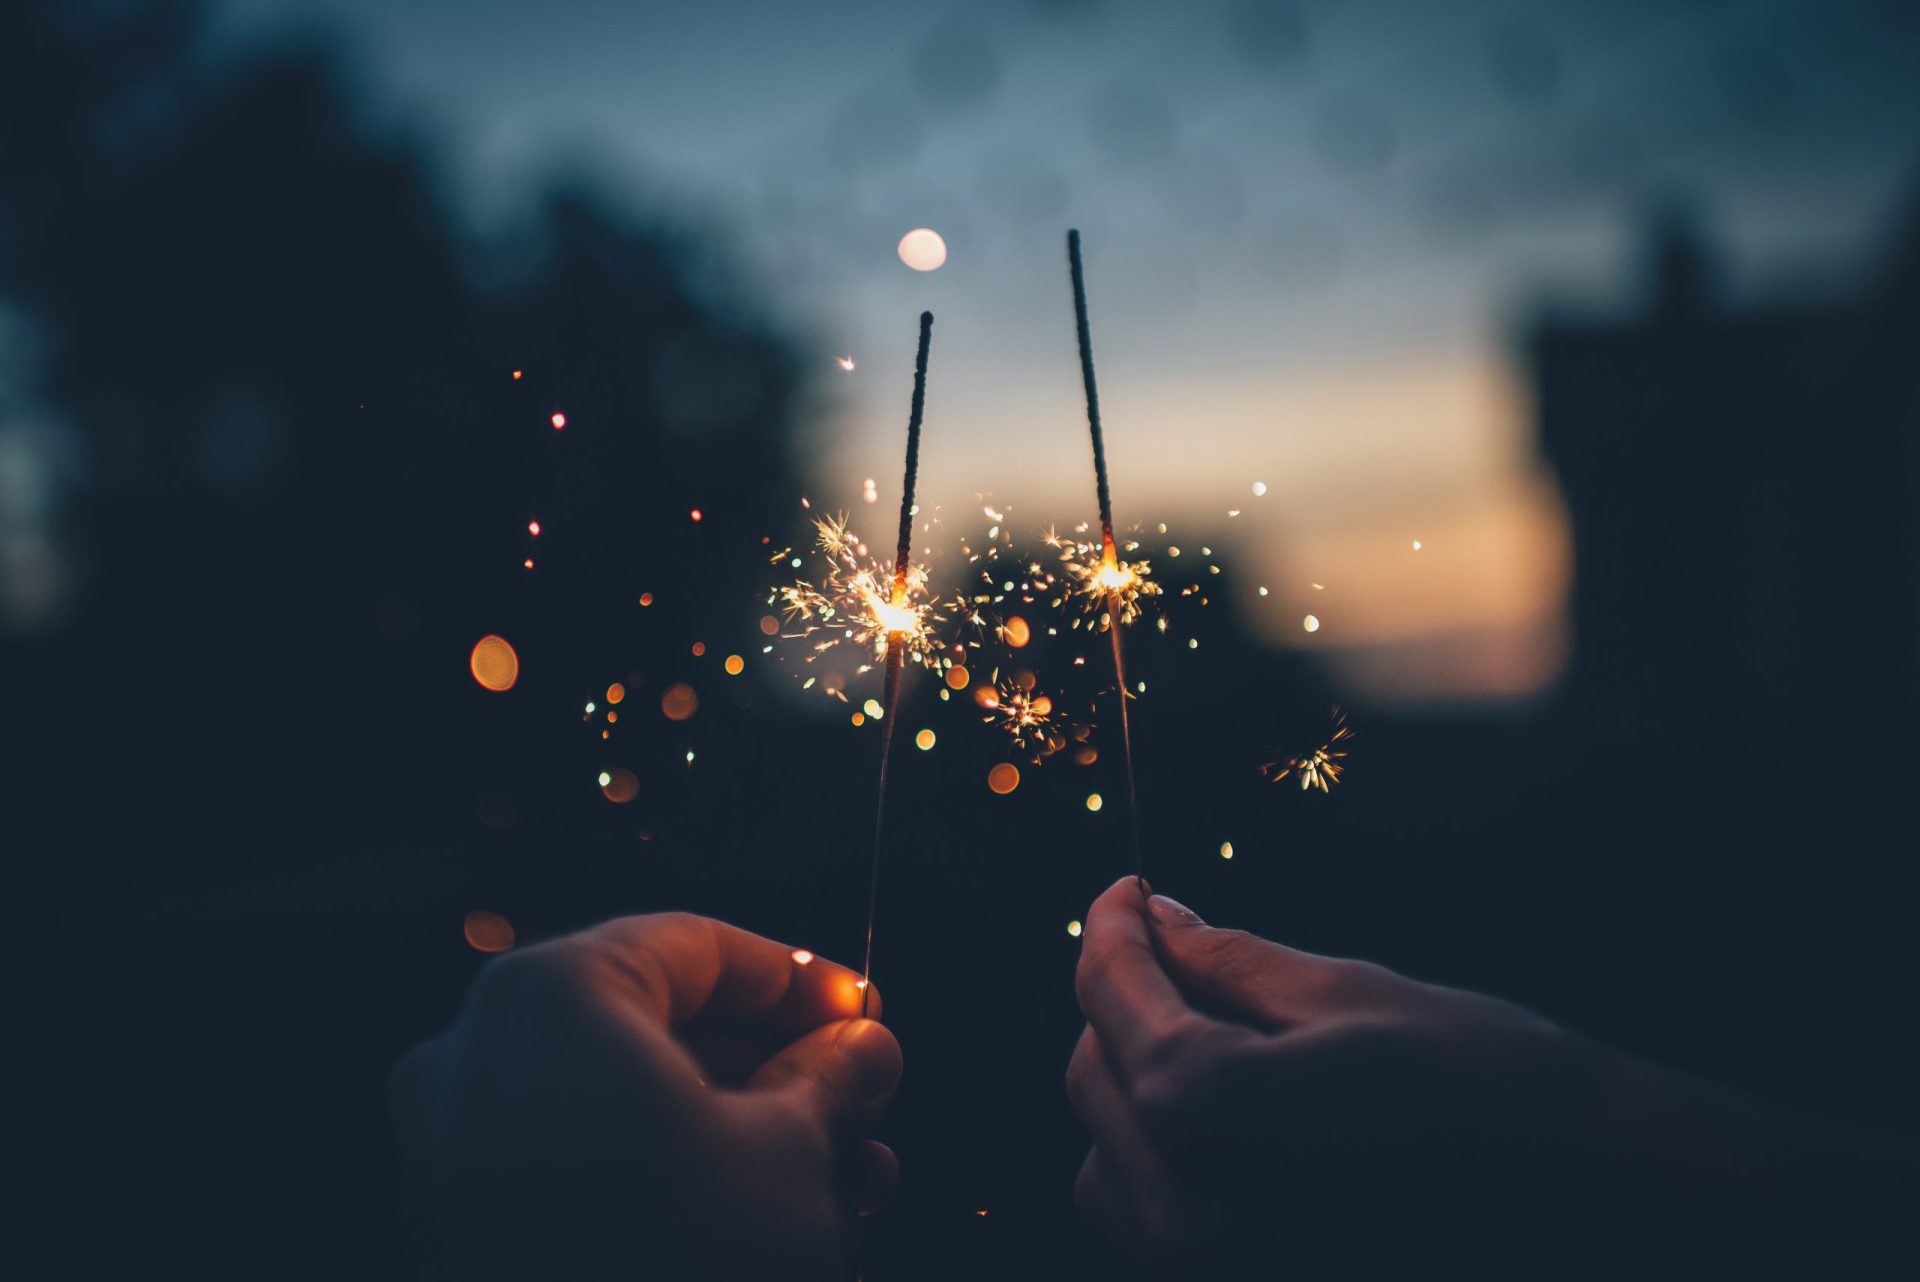 Hands holding two lit sparklers in evening